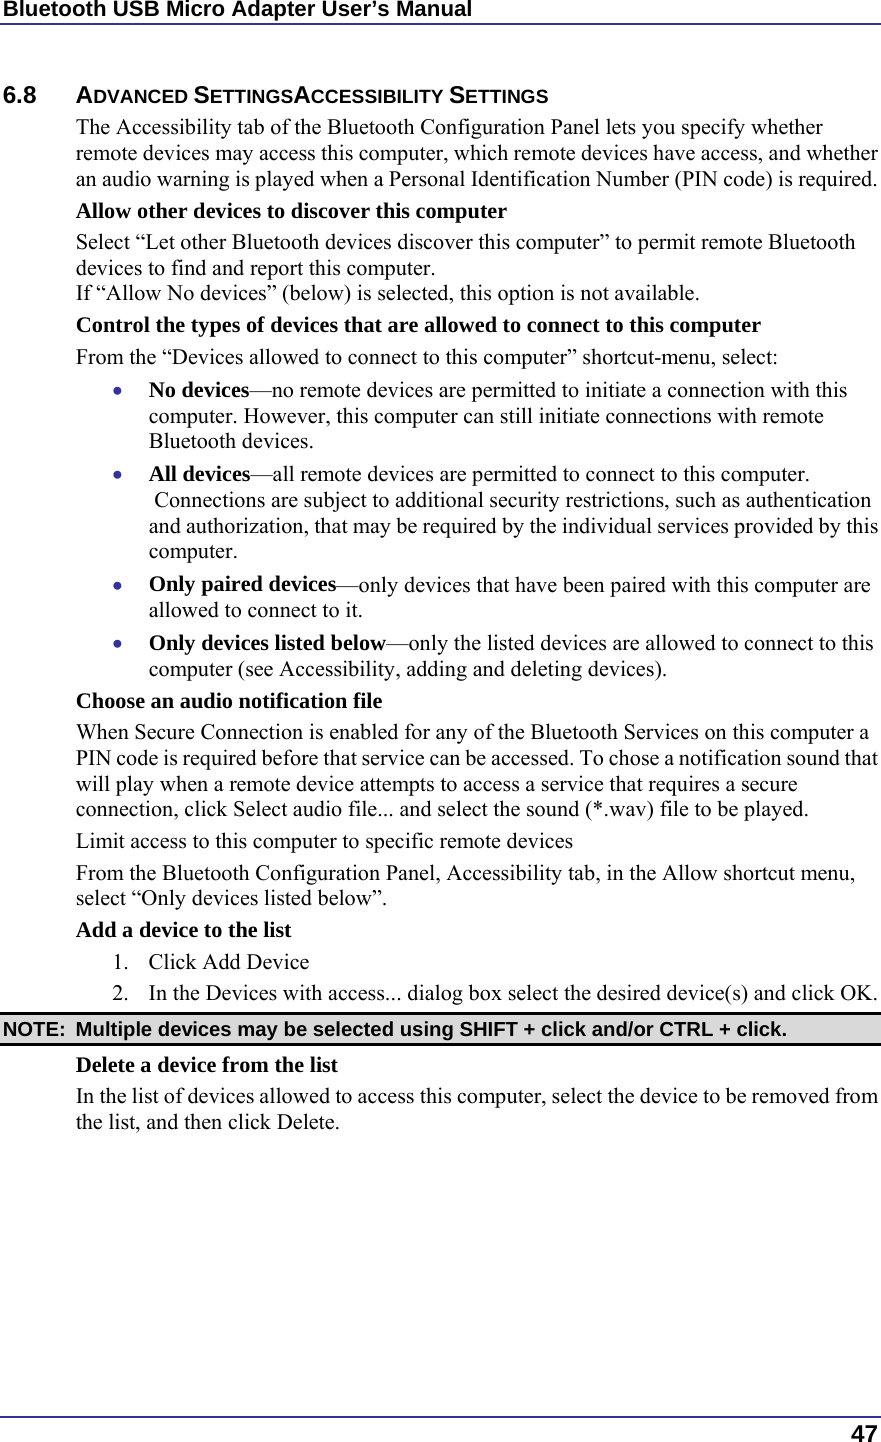 Bluetooth USB Micro Adapter User’s Manual  47 6.8 ADVANCED SETTINGSACCESSIBILITY SETTINGS The Accessibility tab of the Bluetooth Configuration Panel lets you specify whether remote devices may access this computer, which remote devices have access, and whether an audio warning is played when a Personal Identification Number (PIN code) is required. Allow other devices to discover this computer Select “Let other Bluetooth devices discover this computer” to permit remote Bluetooth devices to find and report this computer. If “Allow No devices” (below) is selected, this option is not available. Control the types of devices that are allowed to connect to this computer From the “Devices allowed to connect to this computer” shortcut-menu, select: •  No devices—no remote devices are permitted to initiate a connection with this computer. However, this computer can still initiate connections with remote Bluetooth devices. •  All devices—all remote devices are permitted to connect to this computer.  Connections are subject to additional security restrictions, such as authentication and authorization, that may be required by the individual services provided by this computer. •  Only paired devices—only devices that have been paired with this computer are allowed to connect to it. •  Only devices listed below—only the listed devices are allowed to connect to this computer (see Accessibility, adding and deleting devices). Choose an audio notification file When Secure Connection is enabled for any of the Bluetooth Services on this computer a PIN code is required before that service can be accessed. To chose a notification sound that will play when a remote device attempts to access a service that requires a secure connection, click Select audio file... and select the sound (*.wav) file to be played. Limit access to this computer to specific remote devices From the Bluetooth Configuration Panel, Accessibility tab, in the Allow shortcut menu, select “Only devices listed below”. Add a device to the list 1.  Click Add Device 2.  In the Devices with access... dialog box select the desired device(s) and click OK.  NOTE:  Multiple devices may be selected using SHIFT + click and/or CTRL + click. Delete a device from the list In the list of devices allowed to access this computer, select the device to be removed from the list, and then click Delete.  